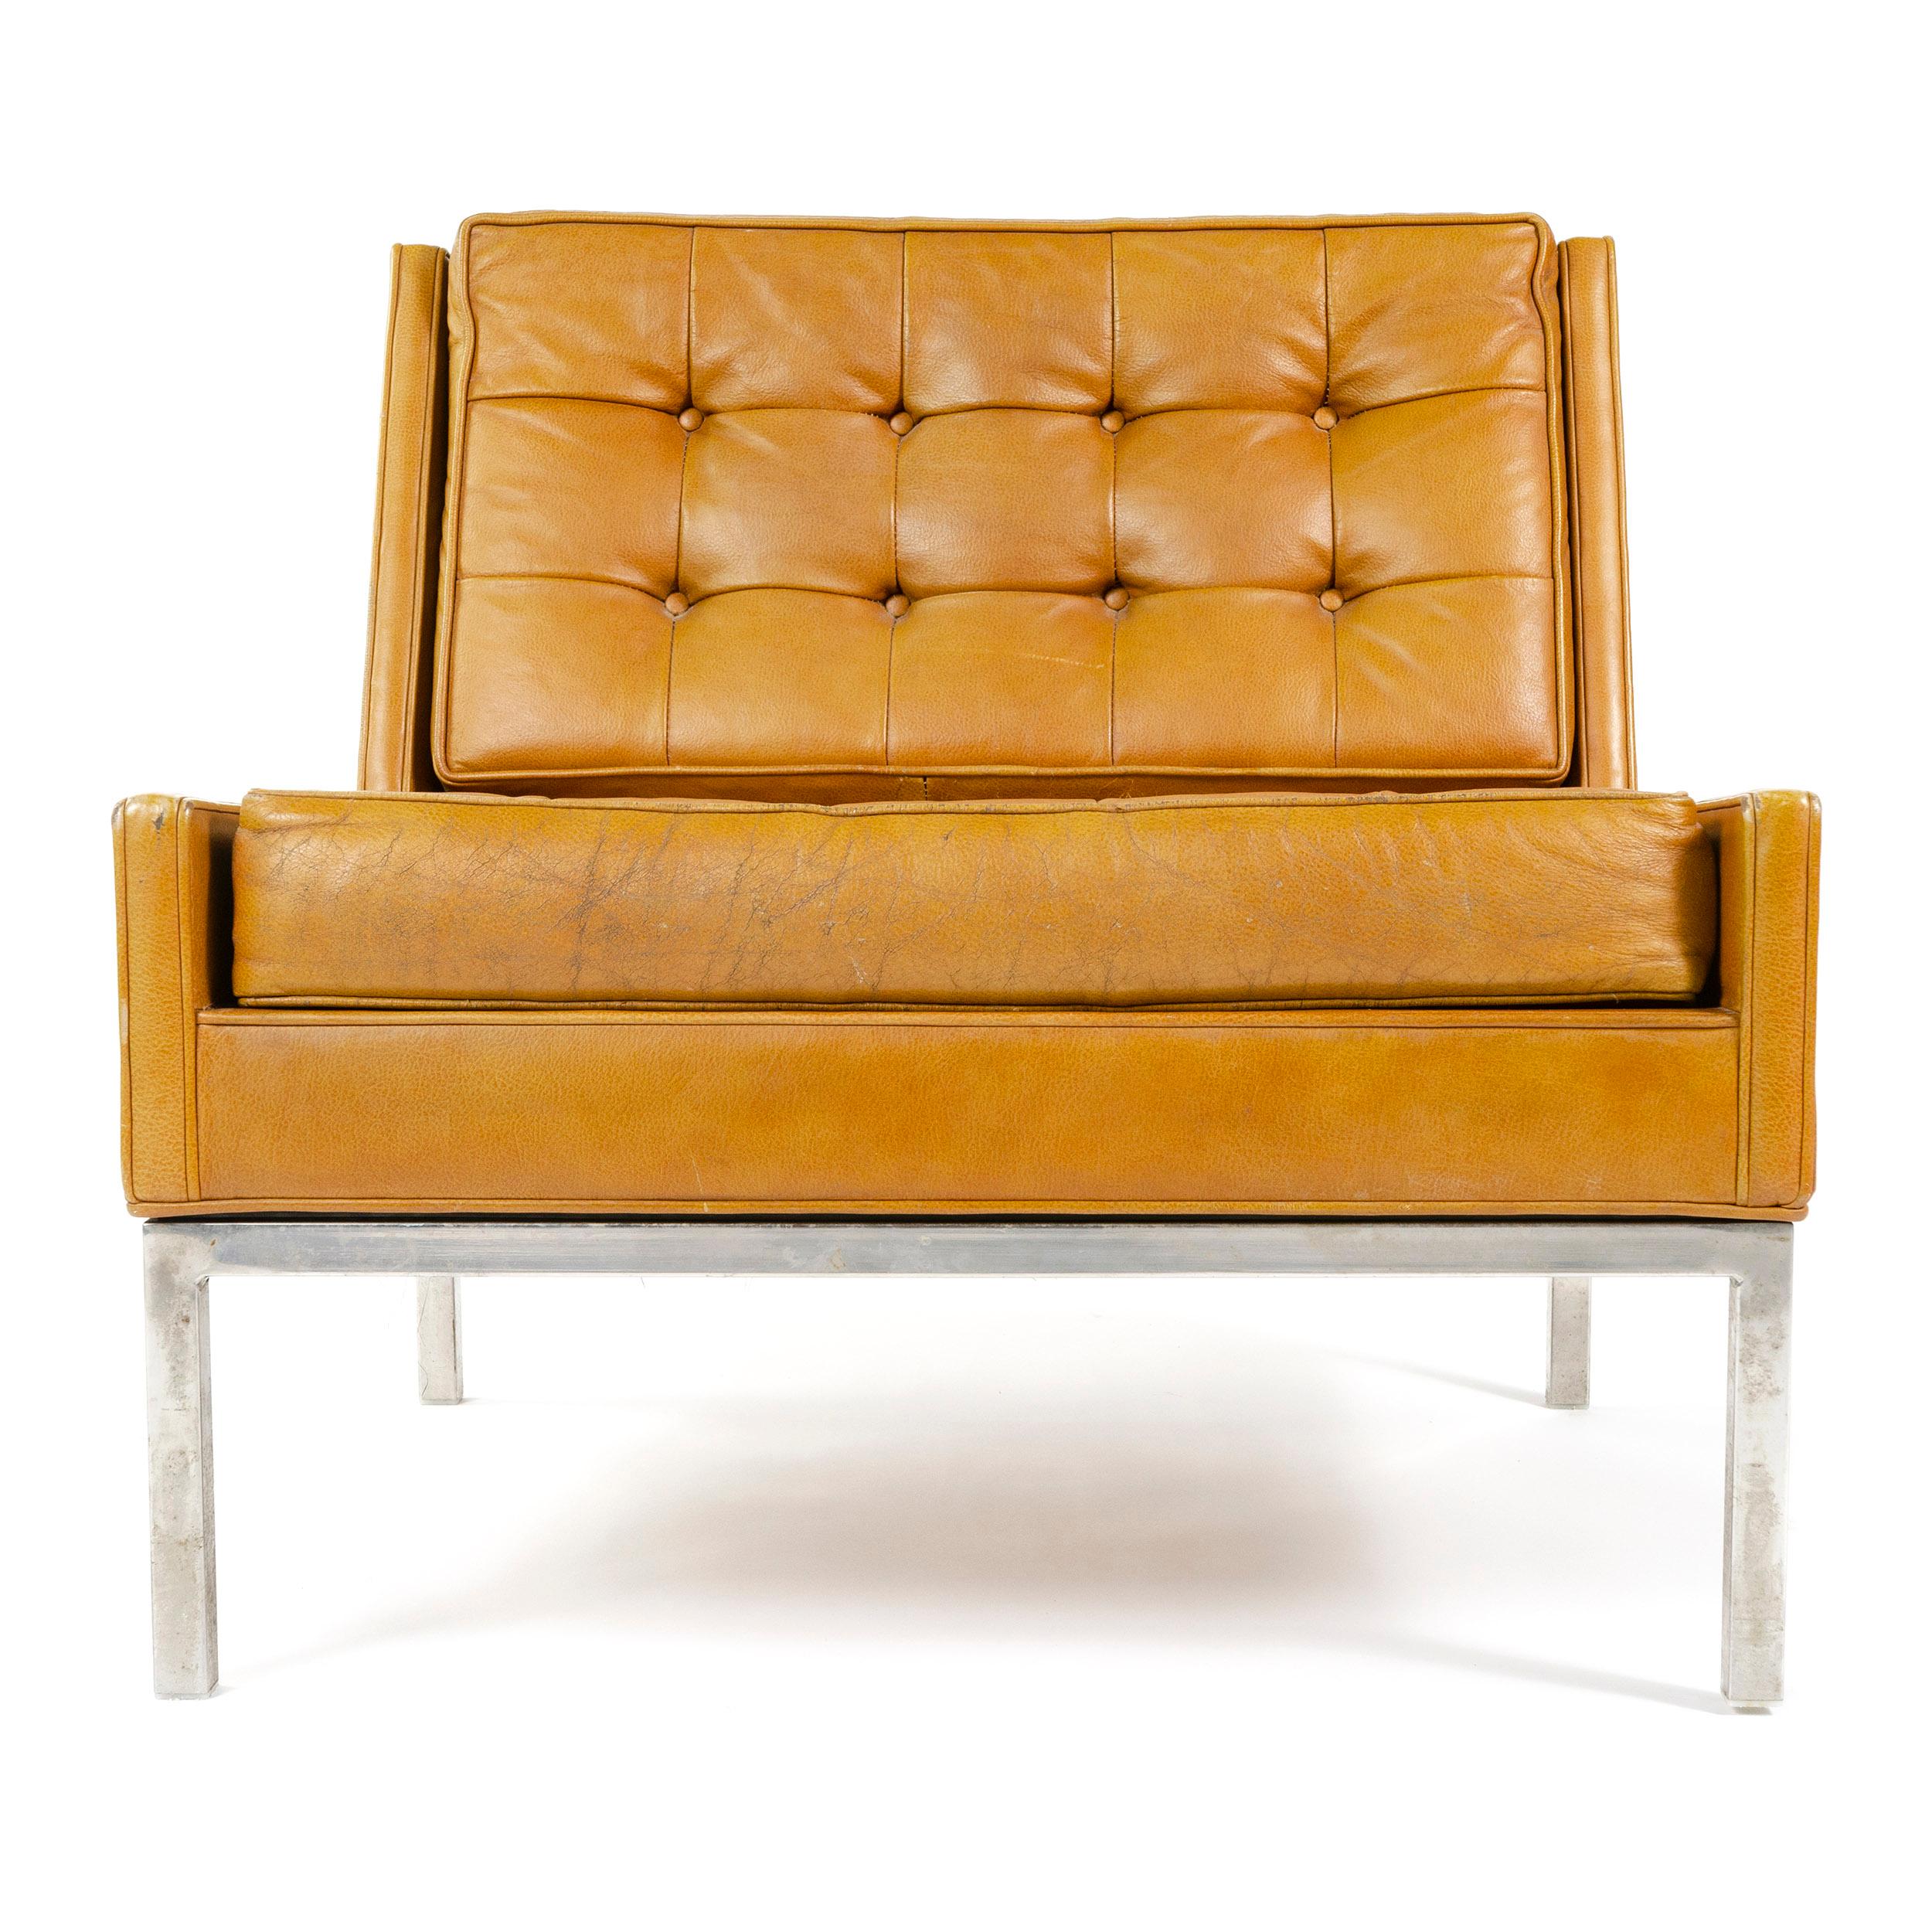 Mid-Century Modern 1960s Leather Lounge Chair by Edward Wormley for Dunbar For Sale